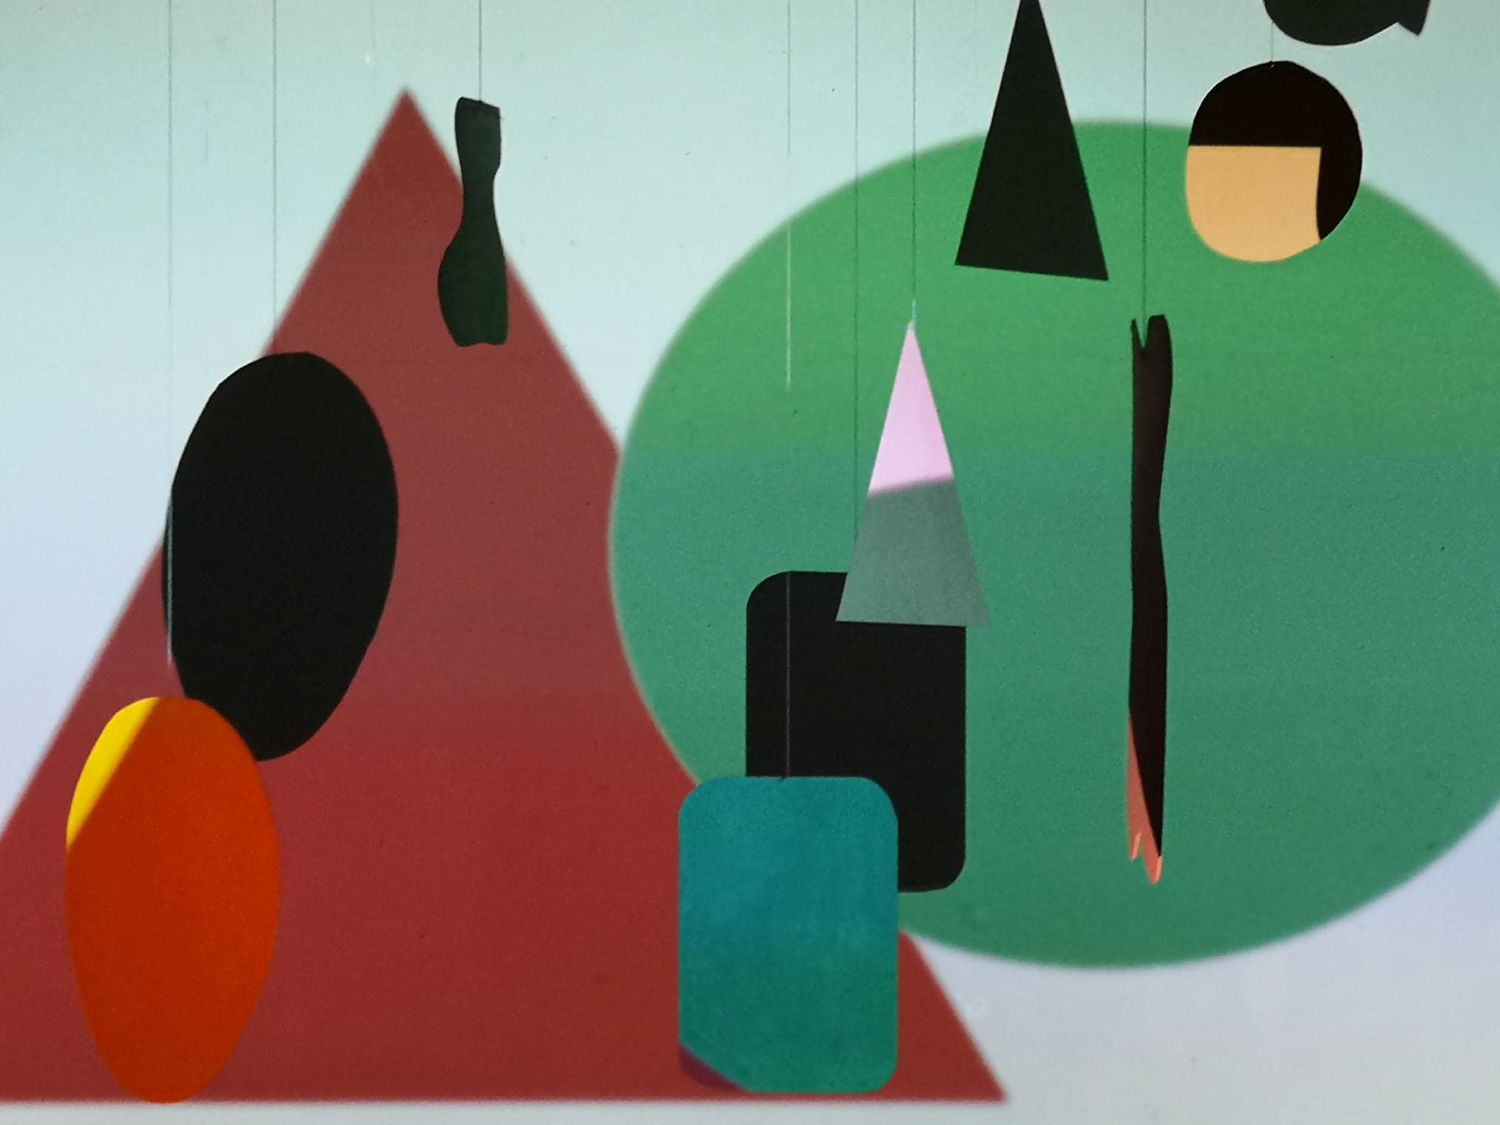 Colourful collage of abstract shapes in green, brown and orange